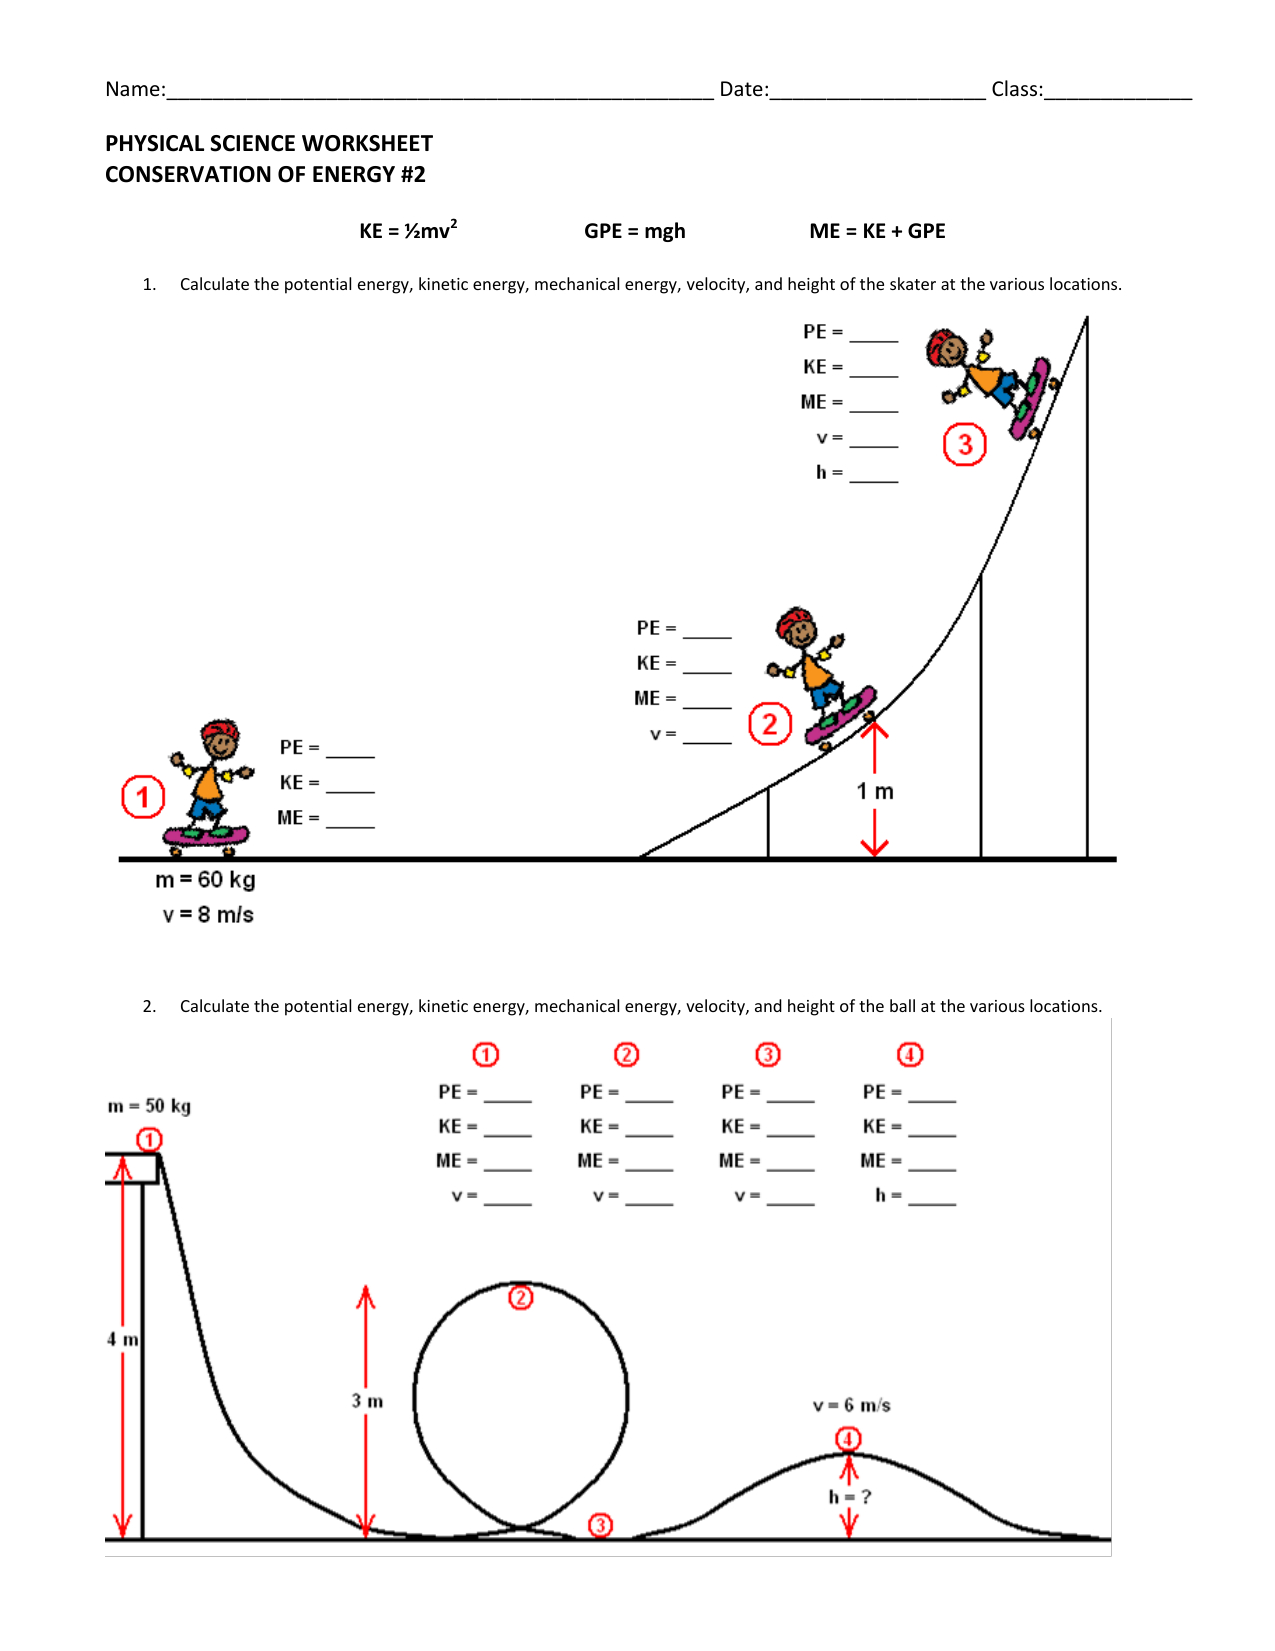 Physical Science Worksheet Conservation Of Energy 2 Db excel